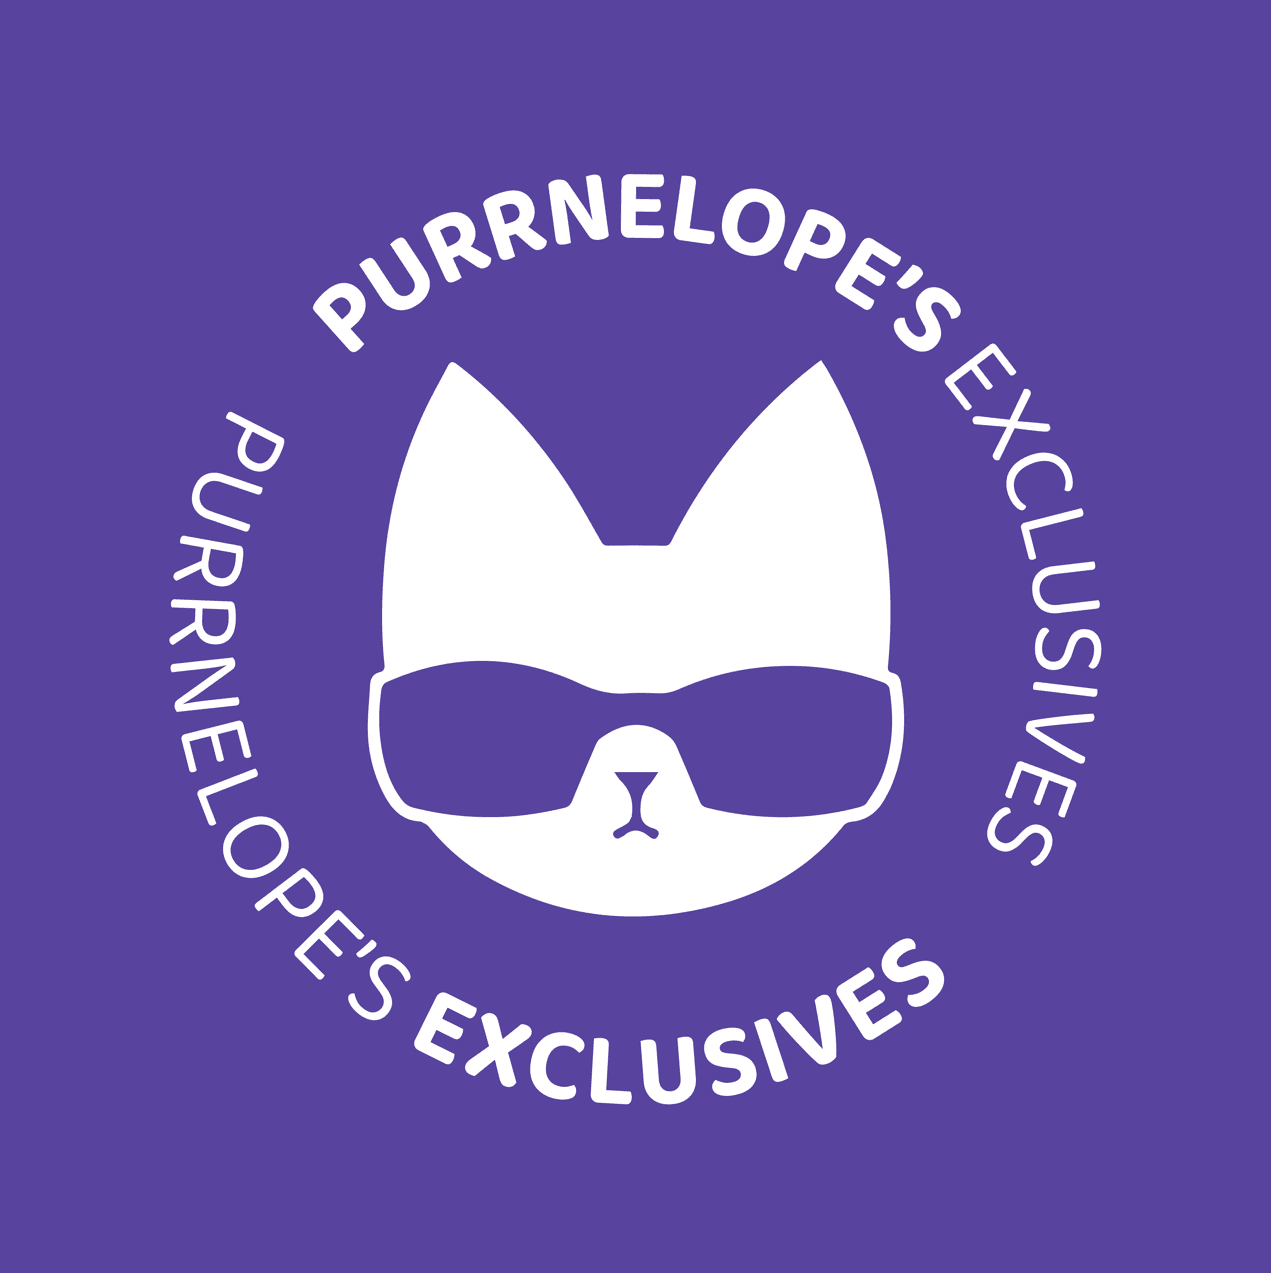 Purrnelopes Exclusives